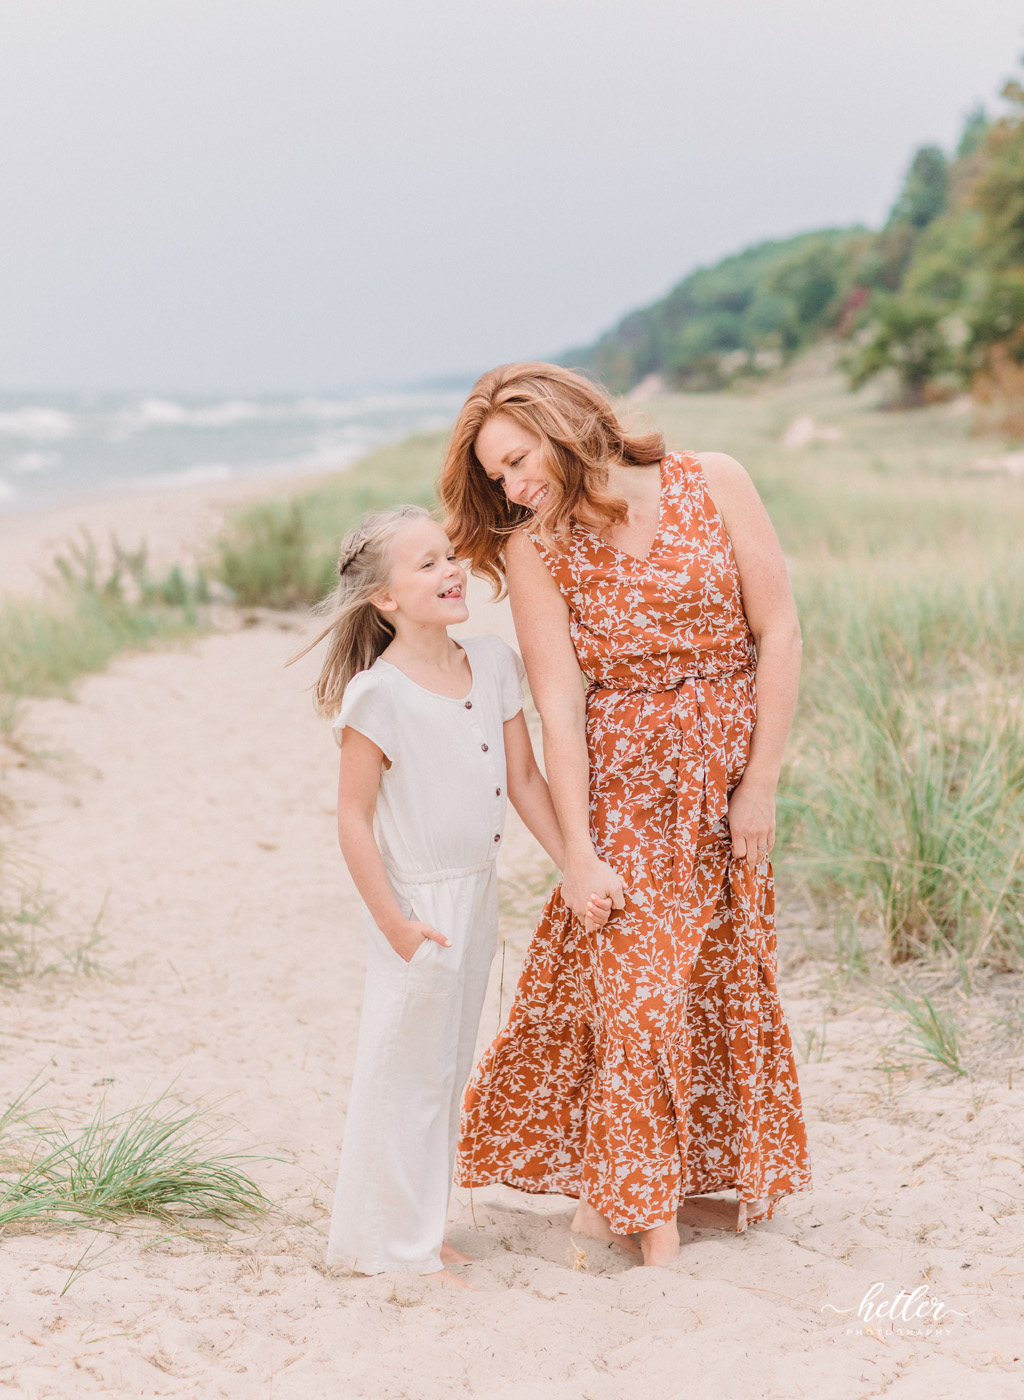 Muskegon extended family beach photo session at PJ Hoffmaster park along Lake Michigan